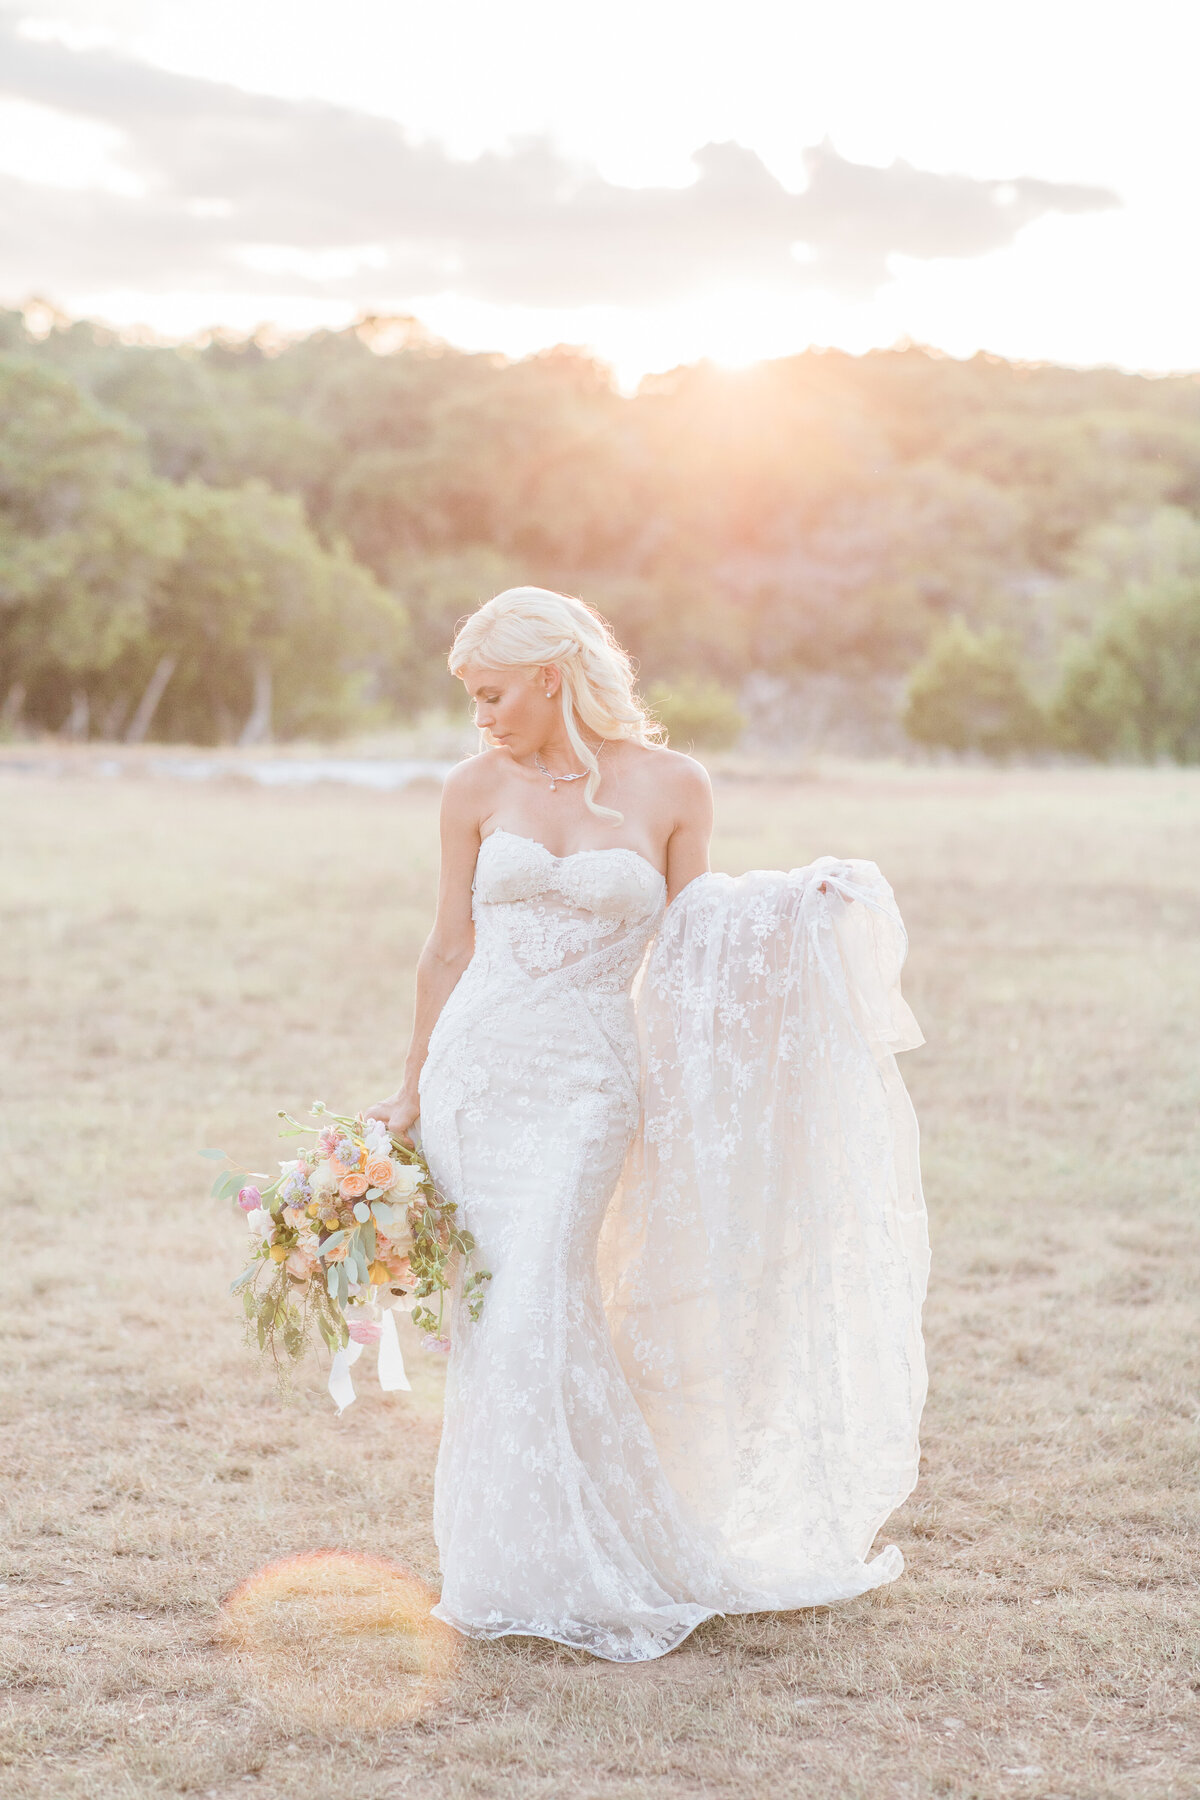 Bride in the Texas Sunset